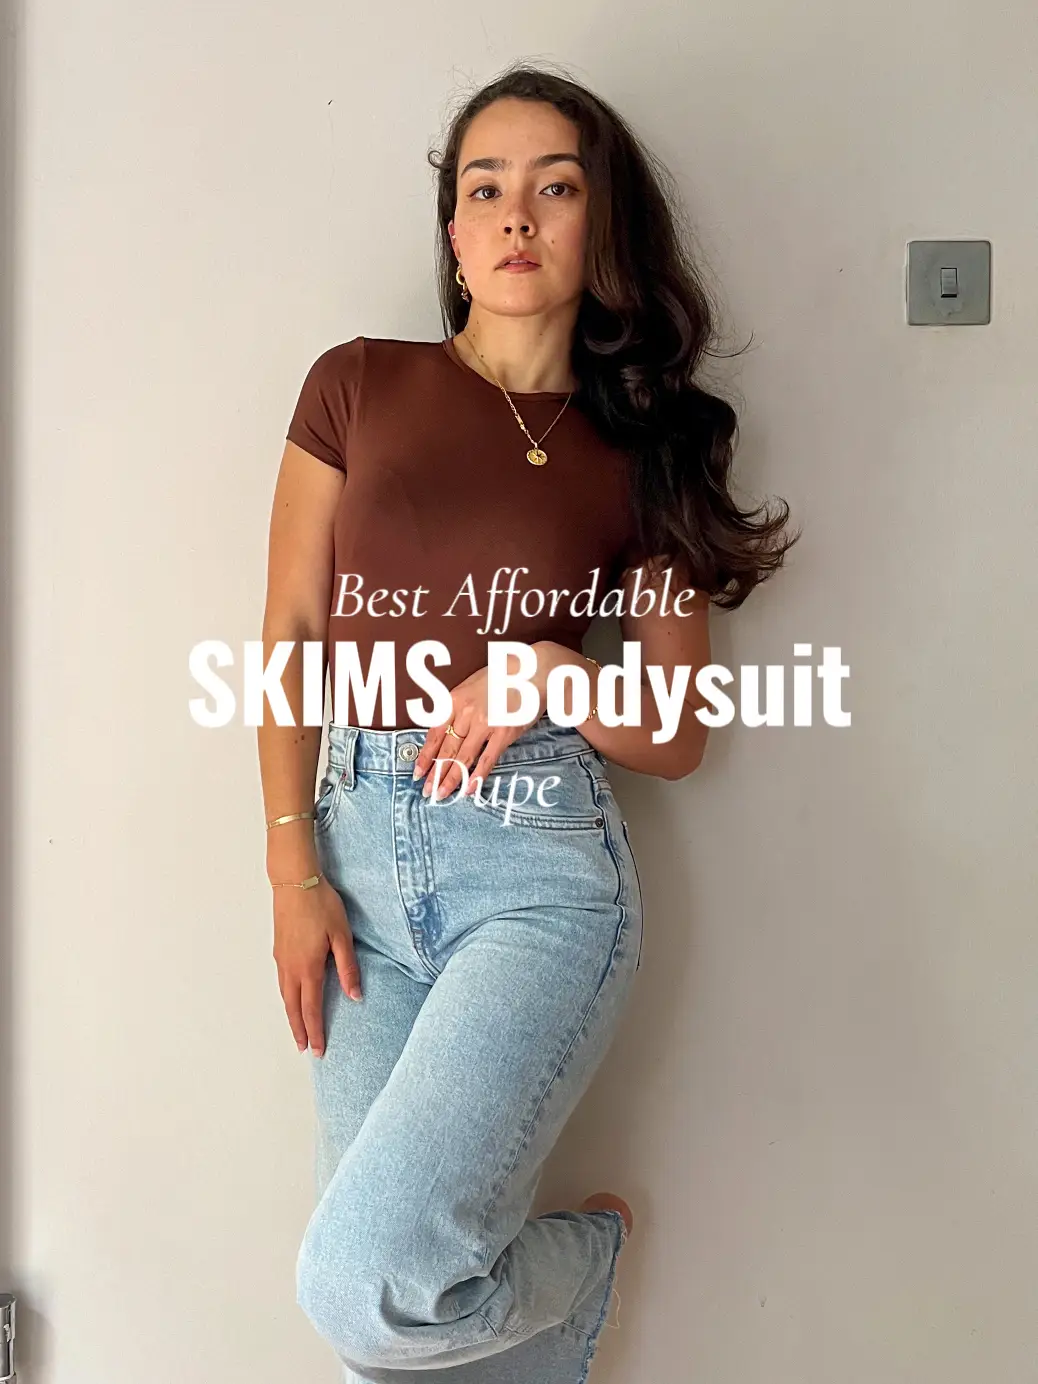 Best Affordable SKIMS Bodysuit Dupe!, Gallery posted by JuliaSH